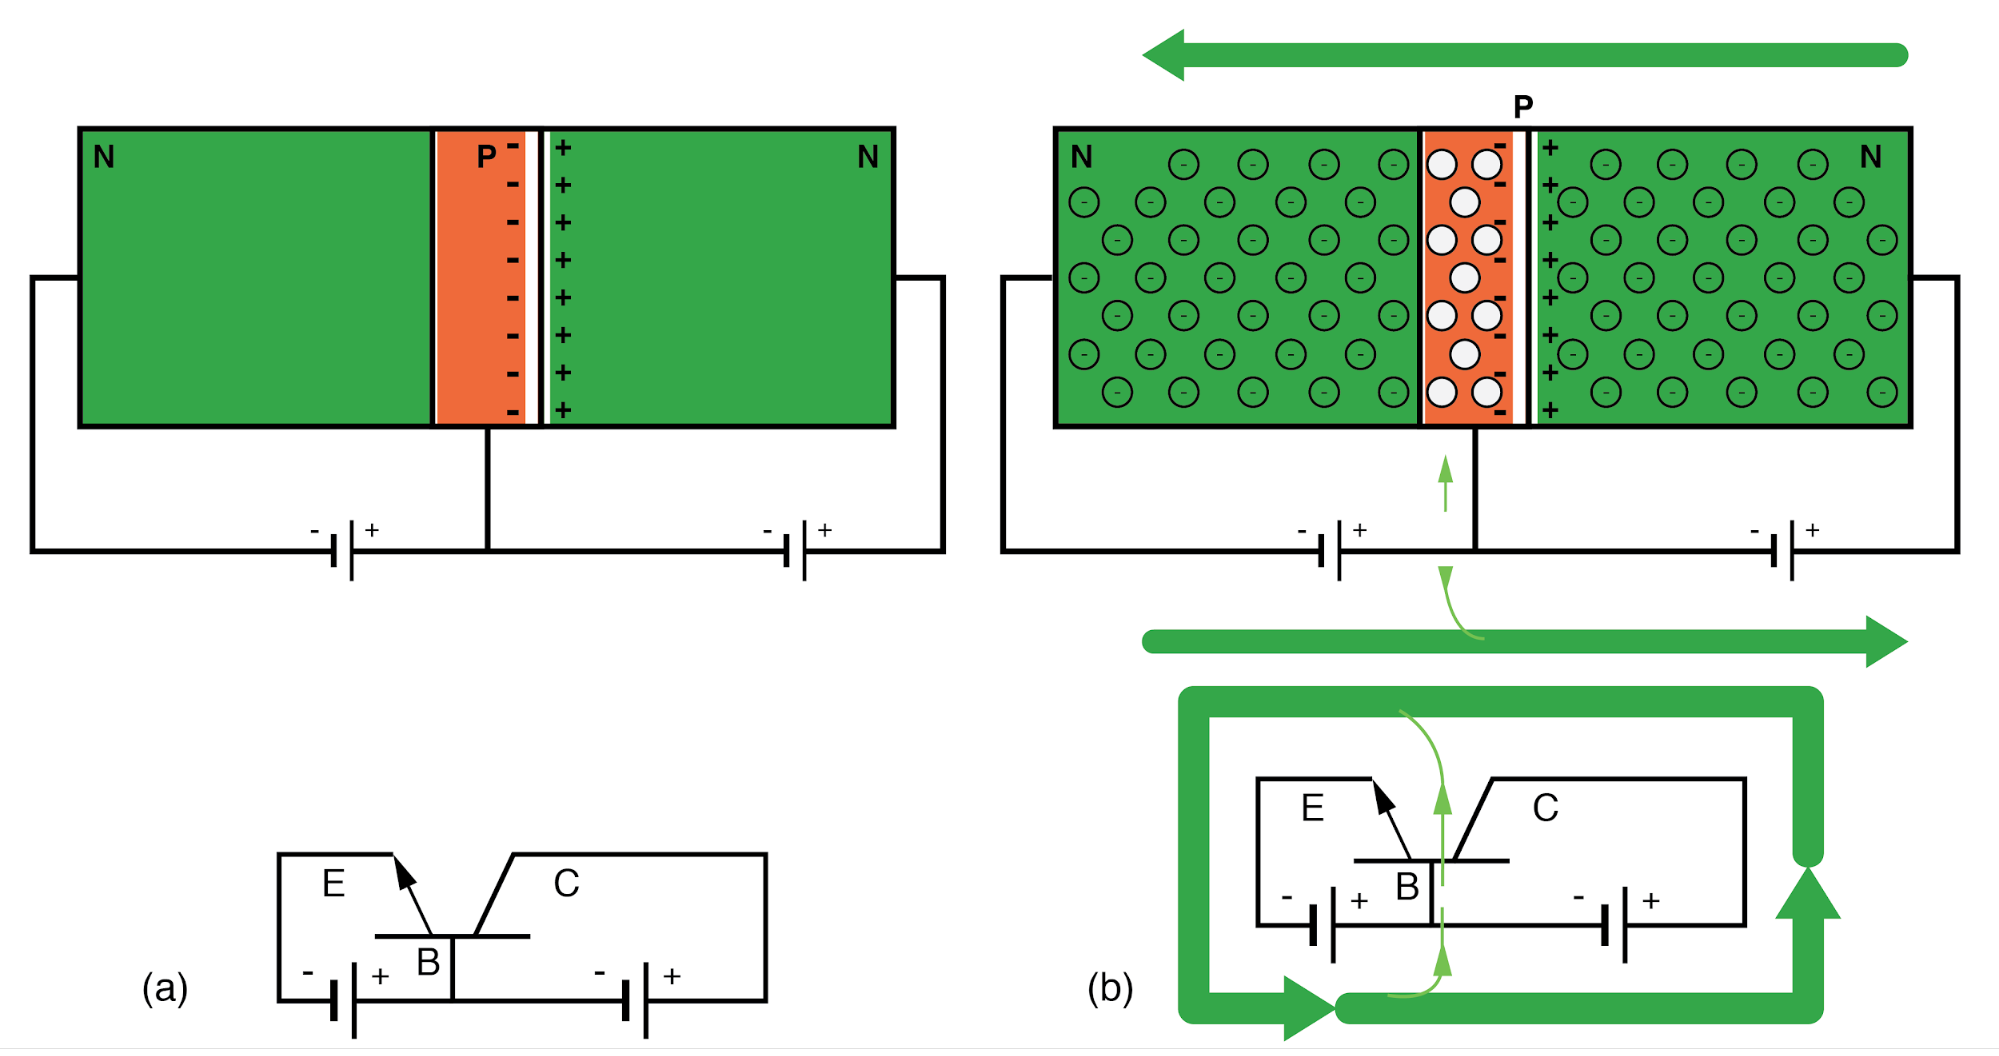 NPN junction bipolar transistor with reverse biased collector-base: (a) Adding forward bias to base-emitter junction, results in (b) a small base current and large emitter and collector currents.